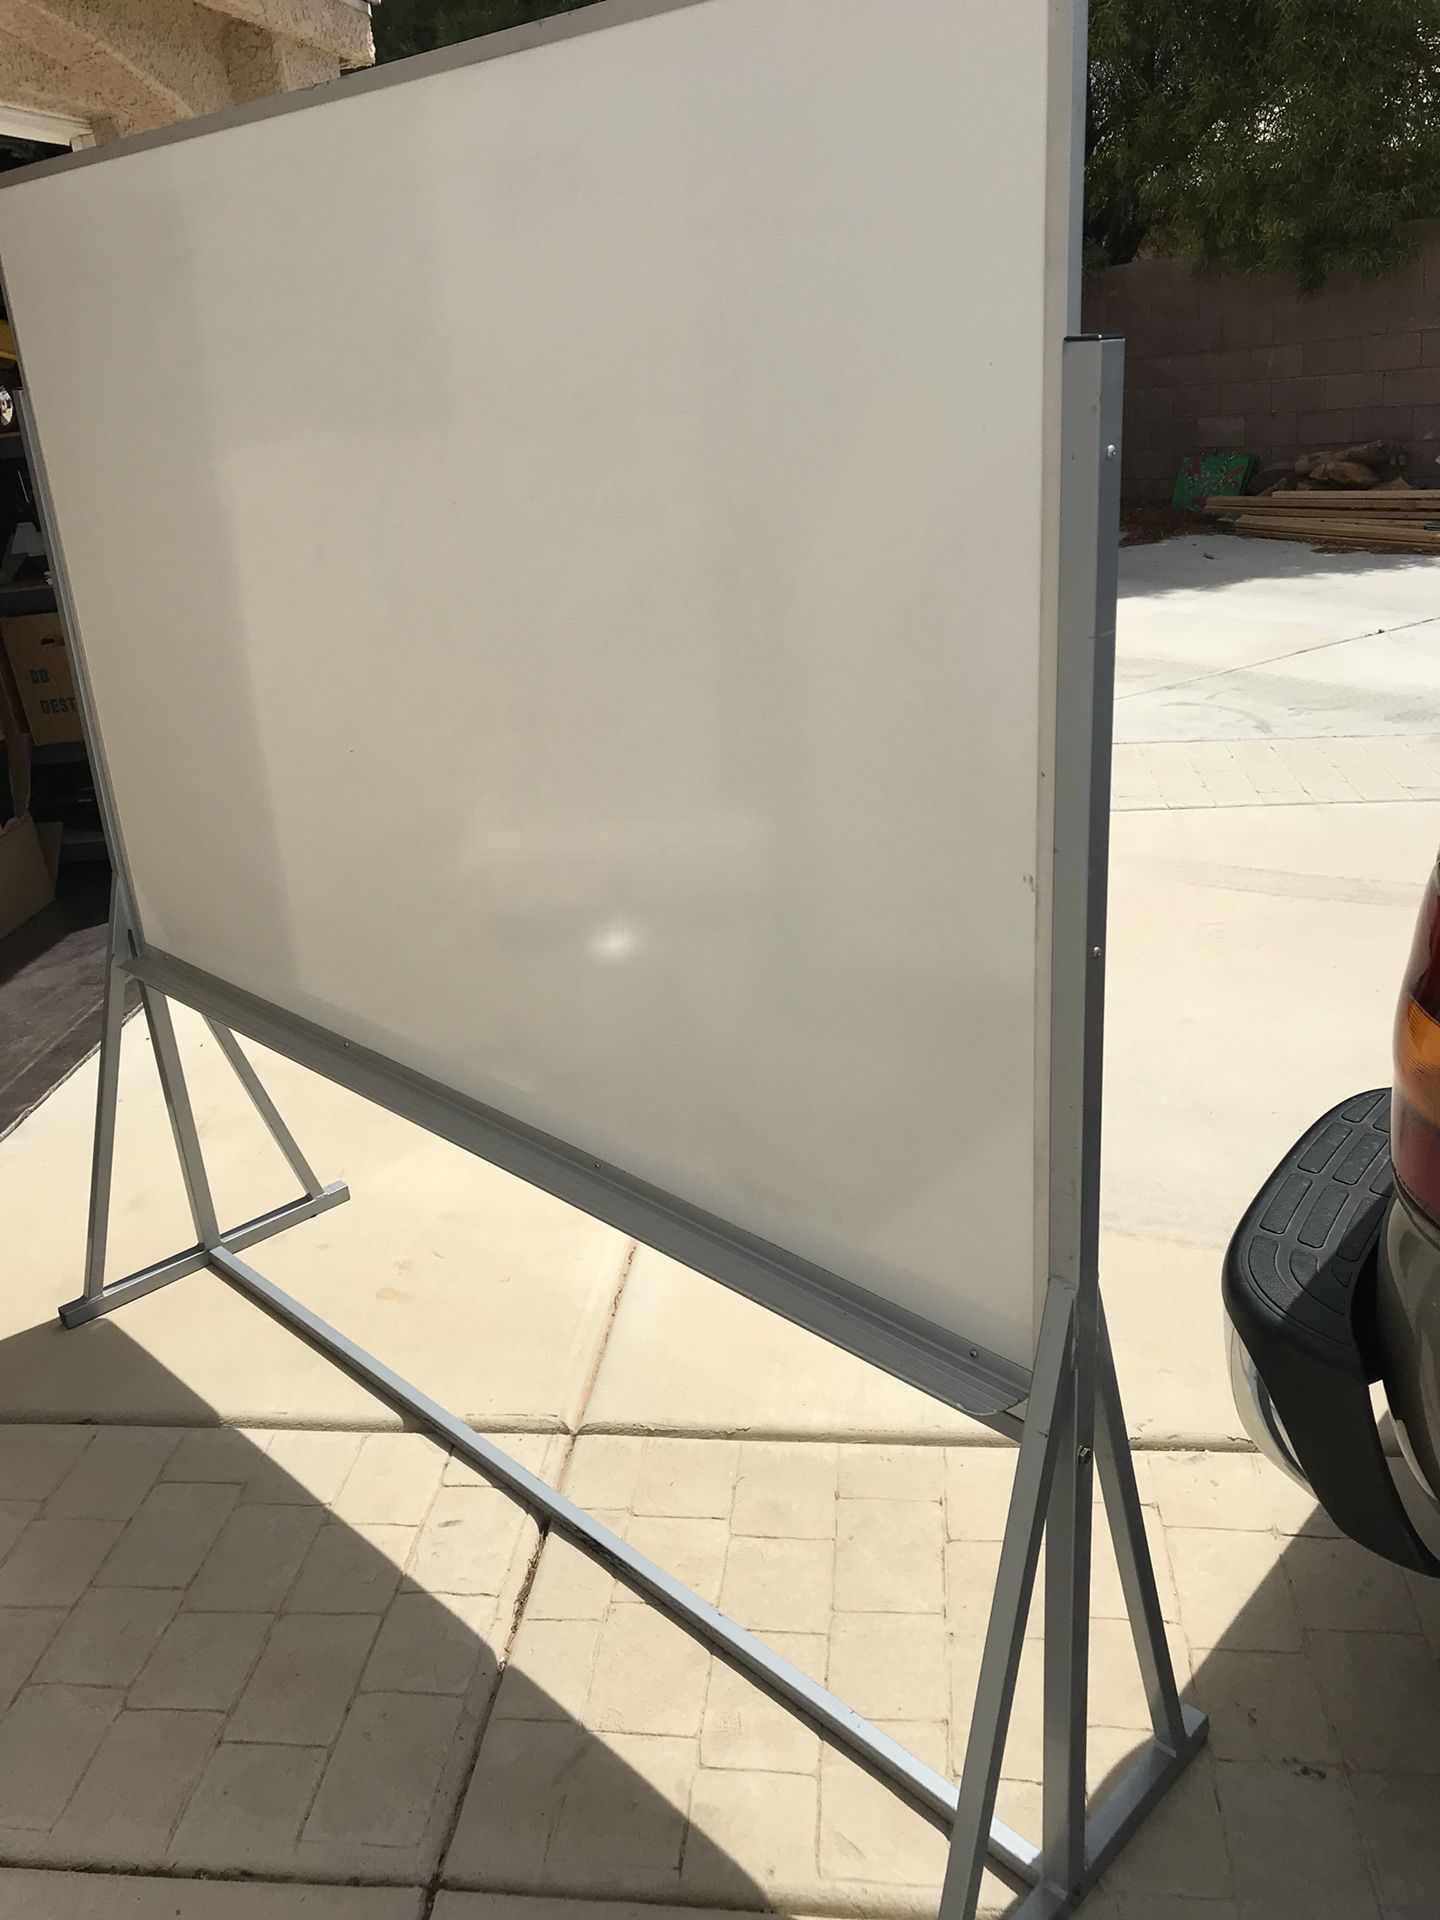 Giant 8ft By 4ft Whiteboard for Sale in Lubbock, TX - OfferUp